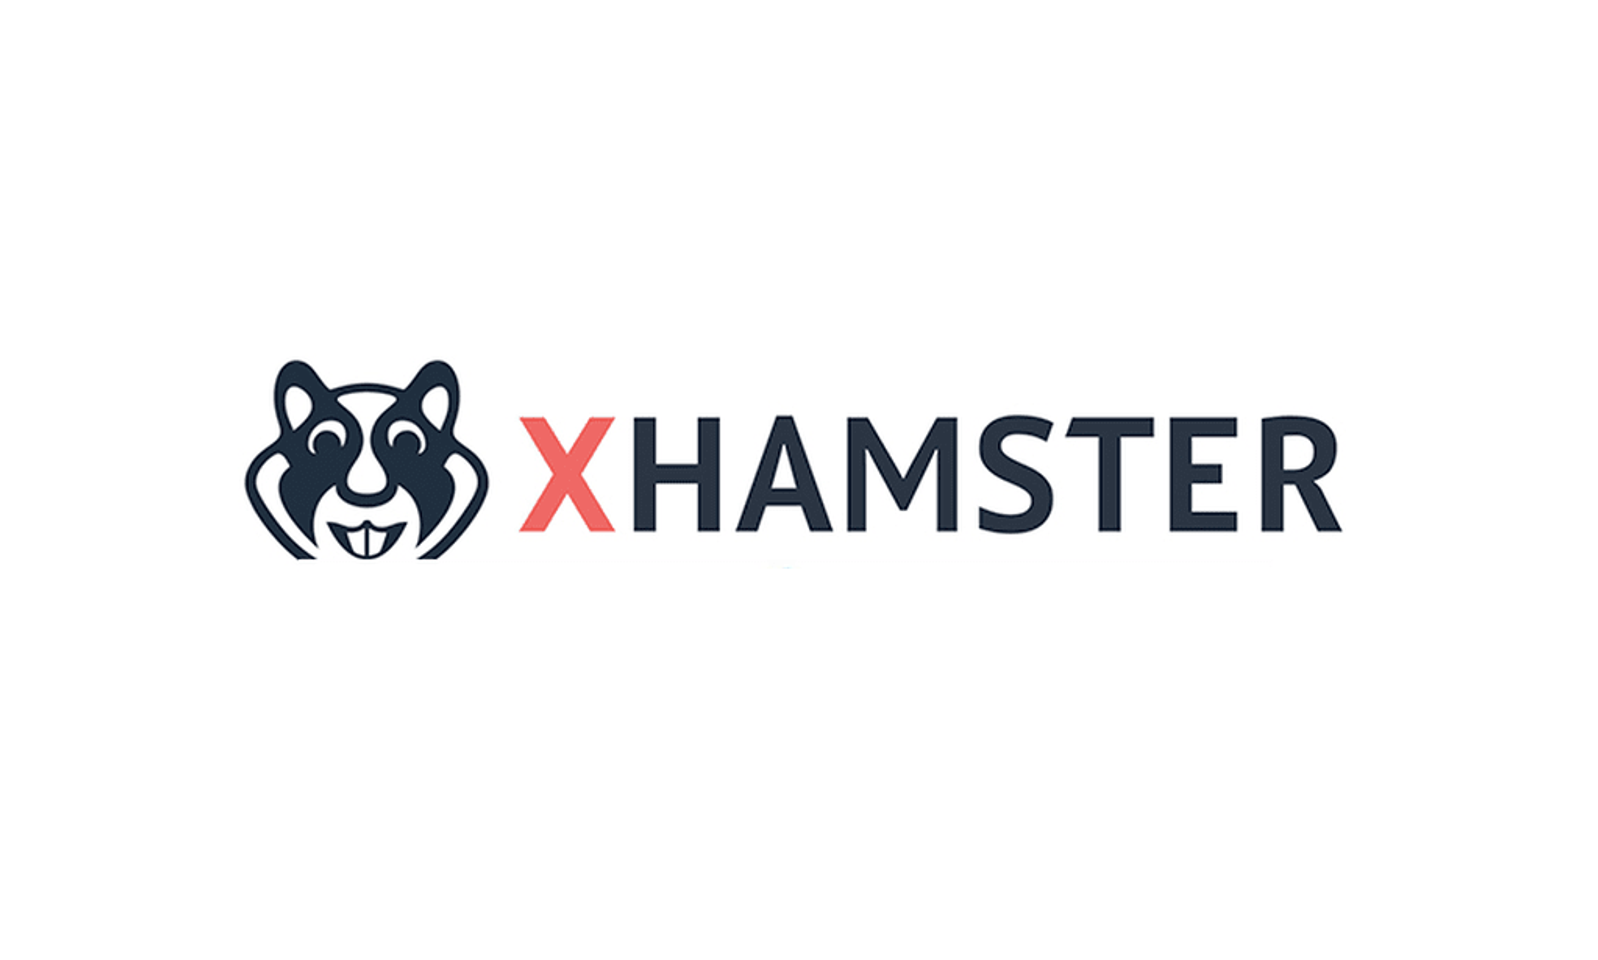 xHamster to Use 1Account for Age Verification in the UK